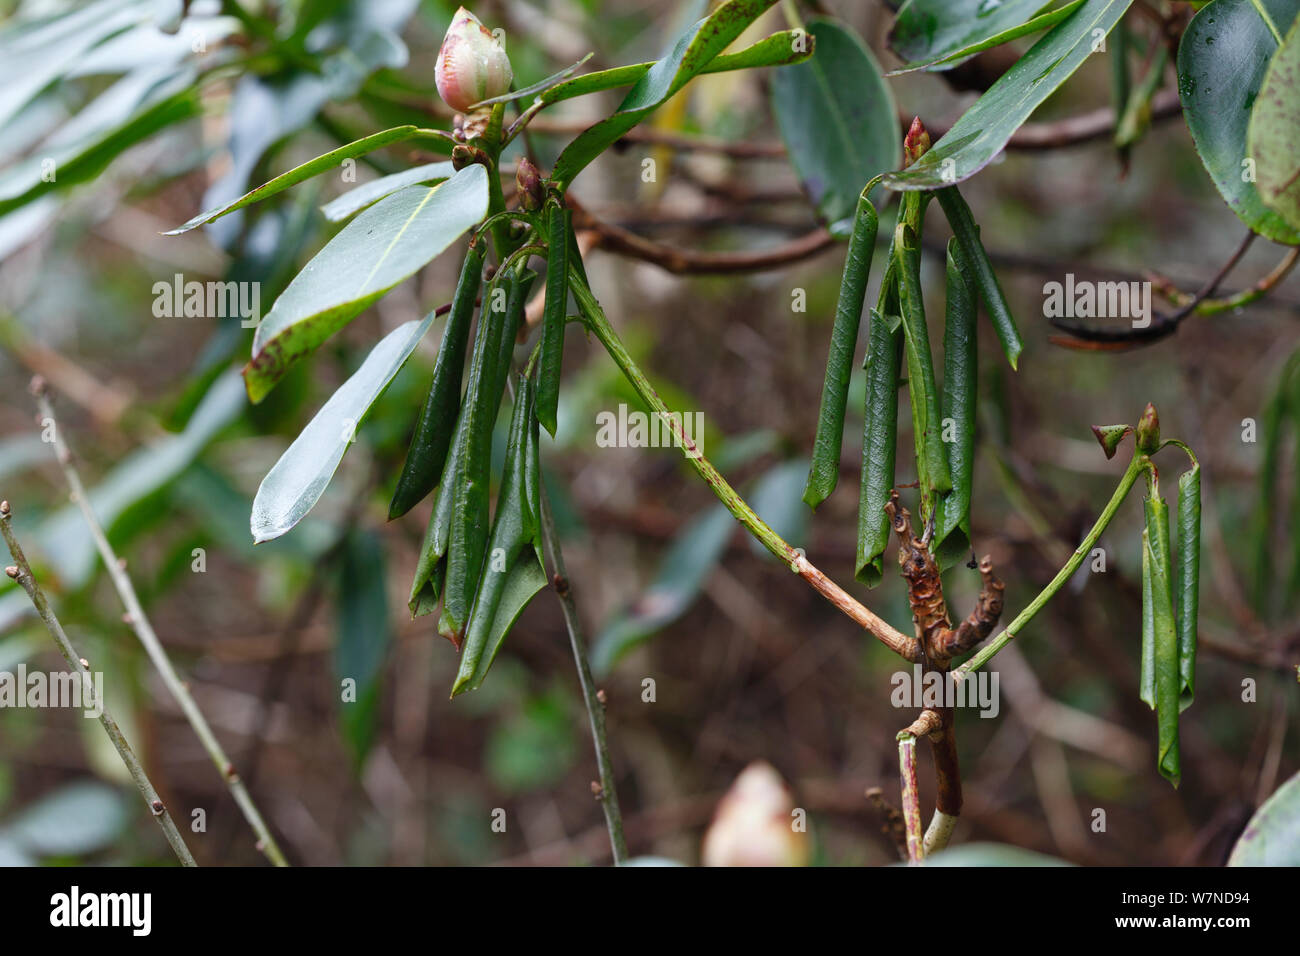 Rhododendron (Rhododendron sp.) leaves showing symptoms of Sudden Oak Death (Phytophthora kernoviae) a fungus-like pathogen. Stock Photo